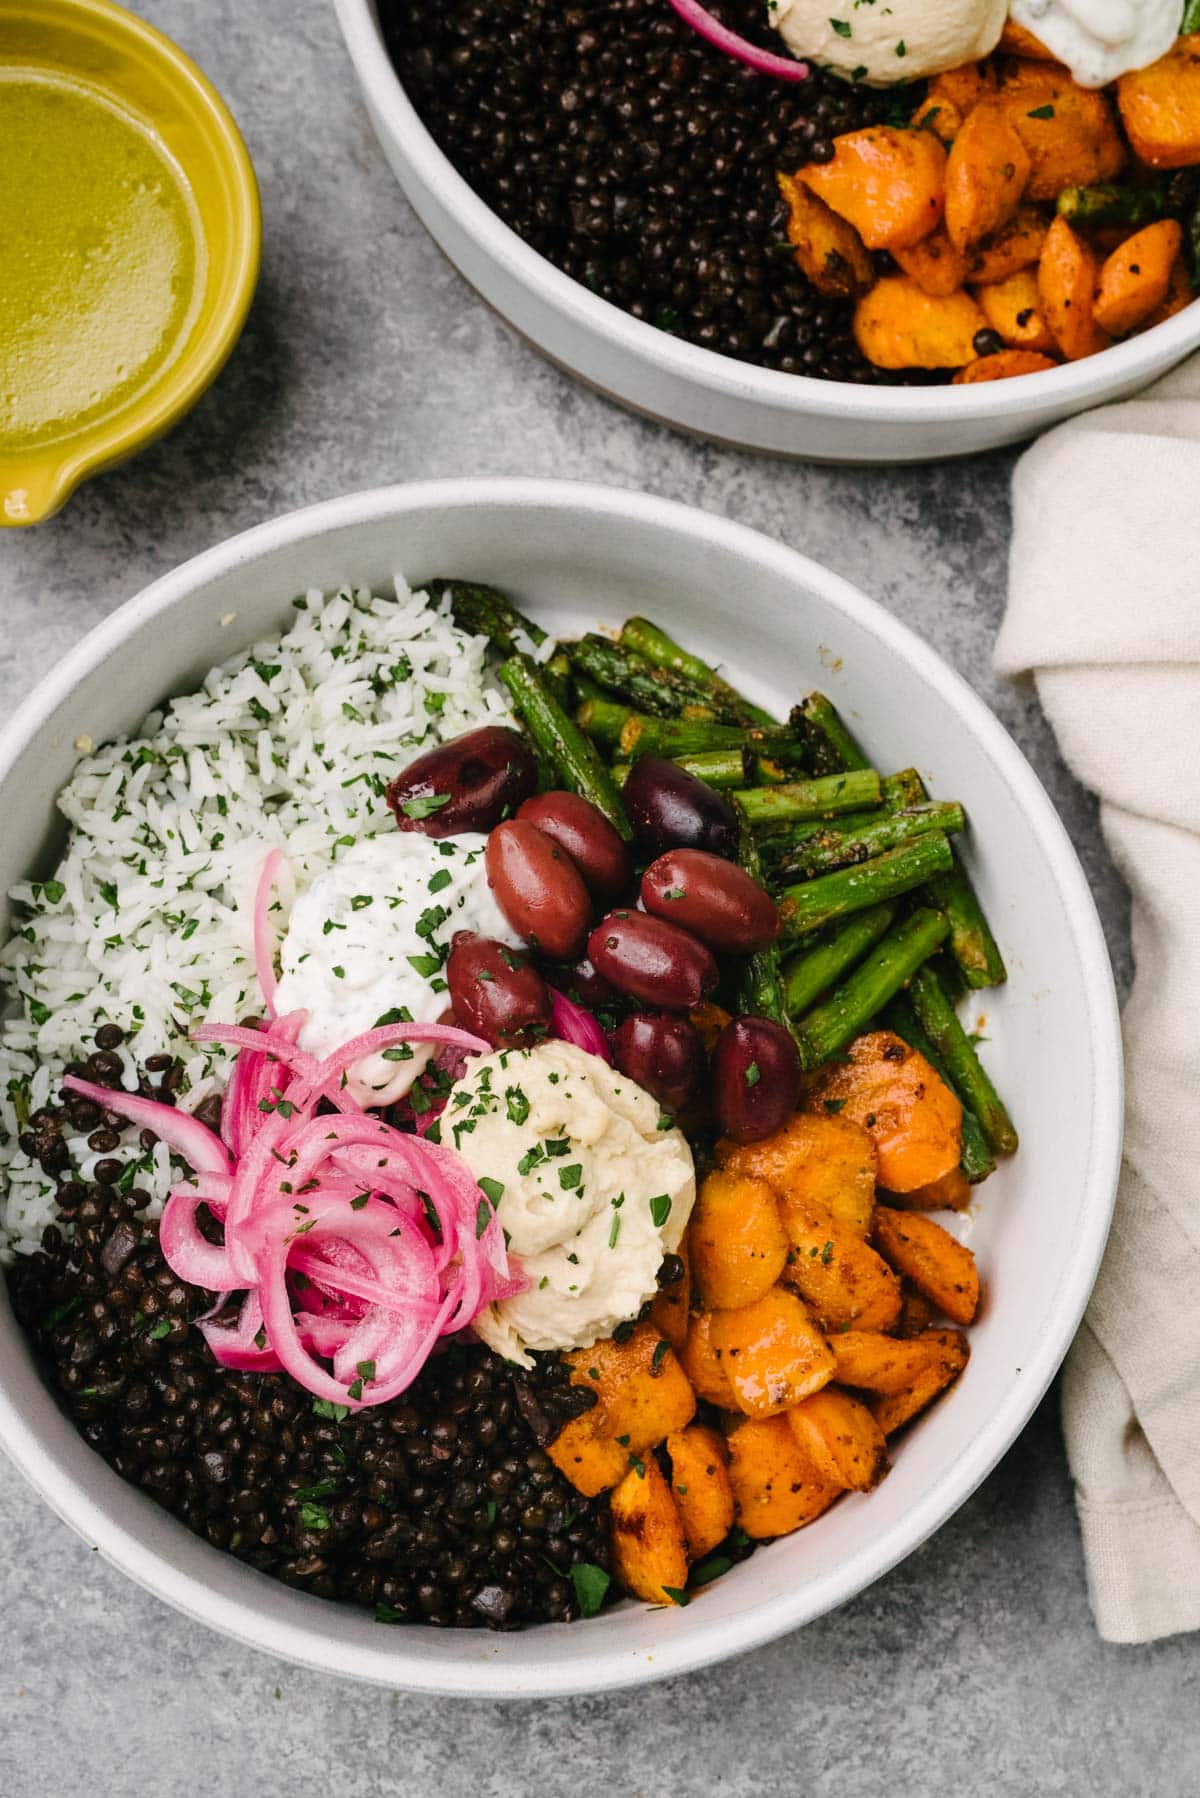 Two black lentil bowls on a concrete surface, surrounded by a cream linen napkin and yellow spouted bowl filled with lemon dressing; each bowl is made with black lentils, herbed rice, roasted vegetables, and various toppings.